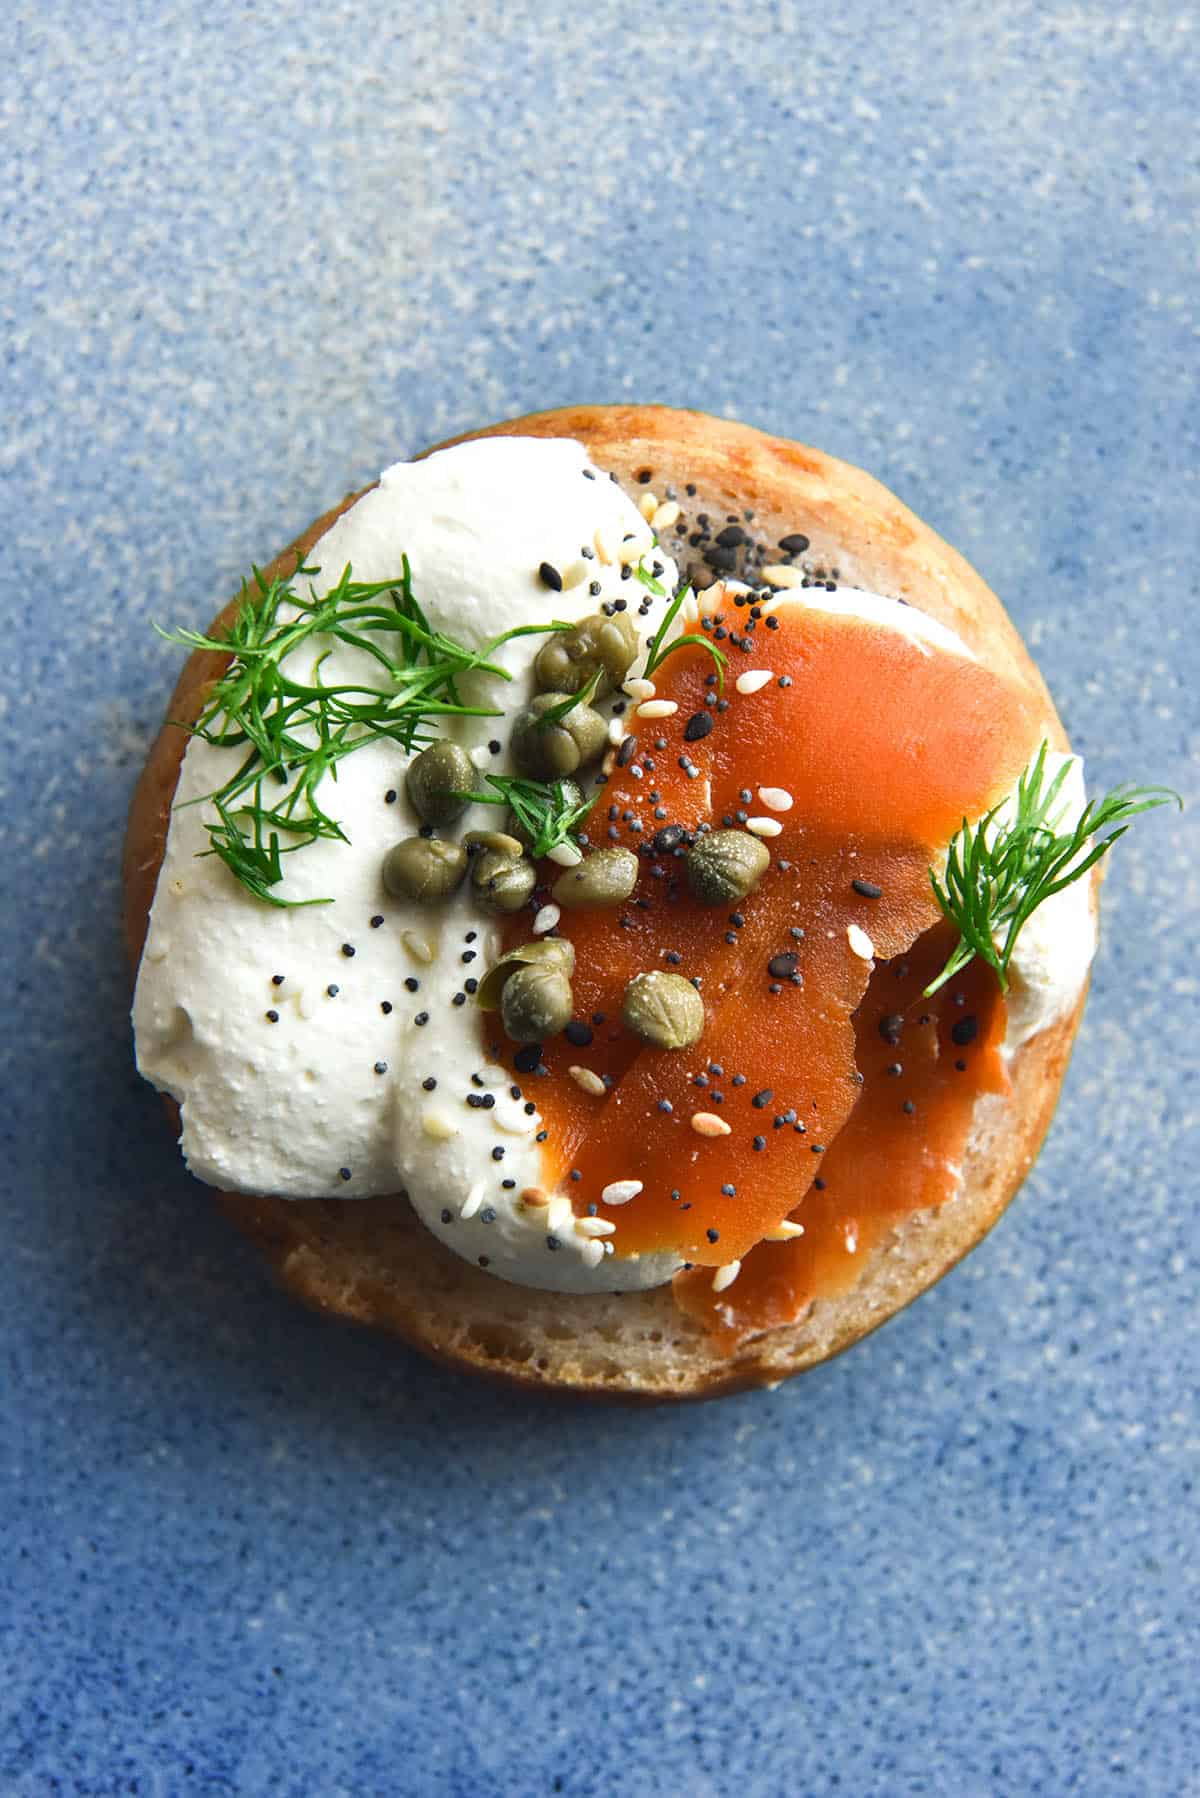 An aerial image of a gluten free bagel topped with whipped lactose free mascarpone, carrot lox, capers, dill and a sprinkling of FODMAP friendly everything bagel seasoning. The bagel sits atop a bright sky blue ceramic plate which contrasts beautifully with the bright orange carrot lox 